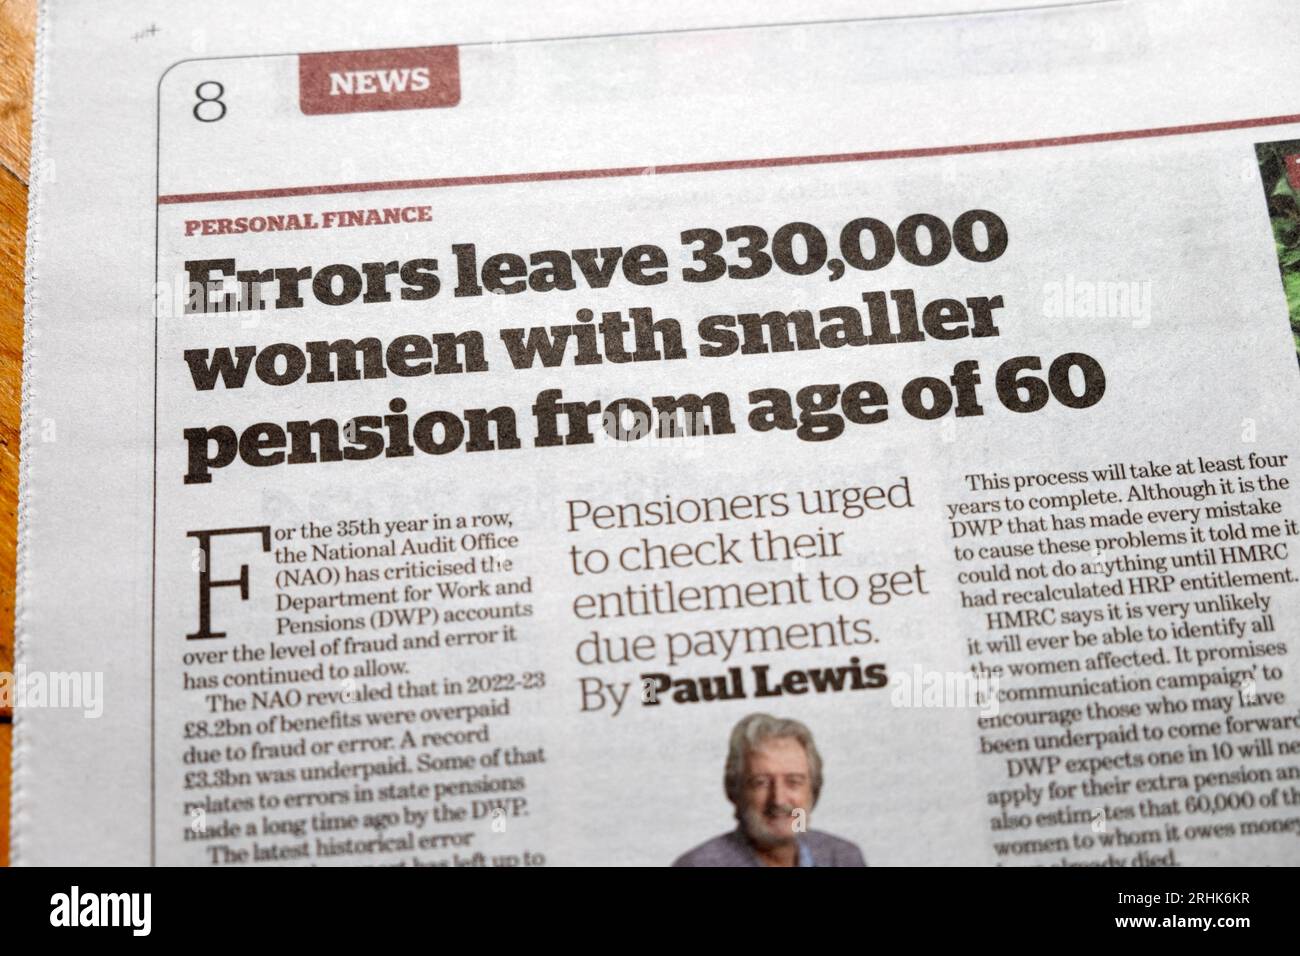 'Errors leave 330,000 women with smaller pension from age 60' i newspaper headline British pensions payment shortfall article London UK 17 August 2023 Stock Photo